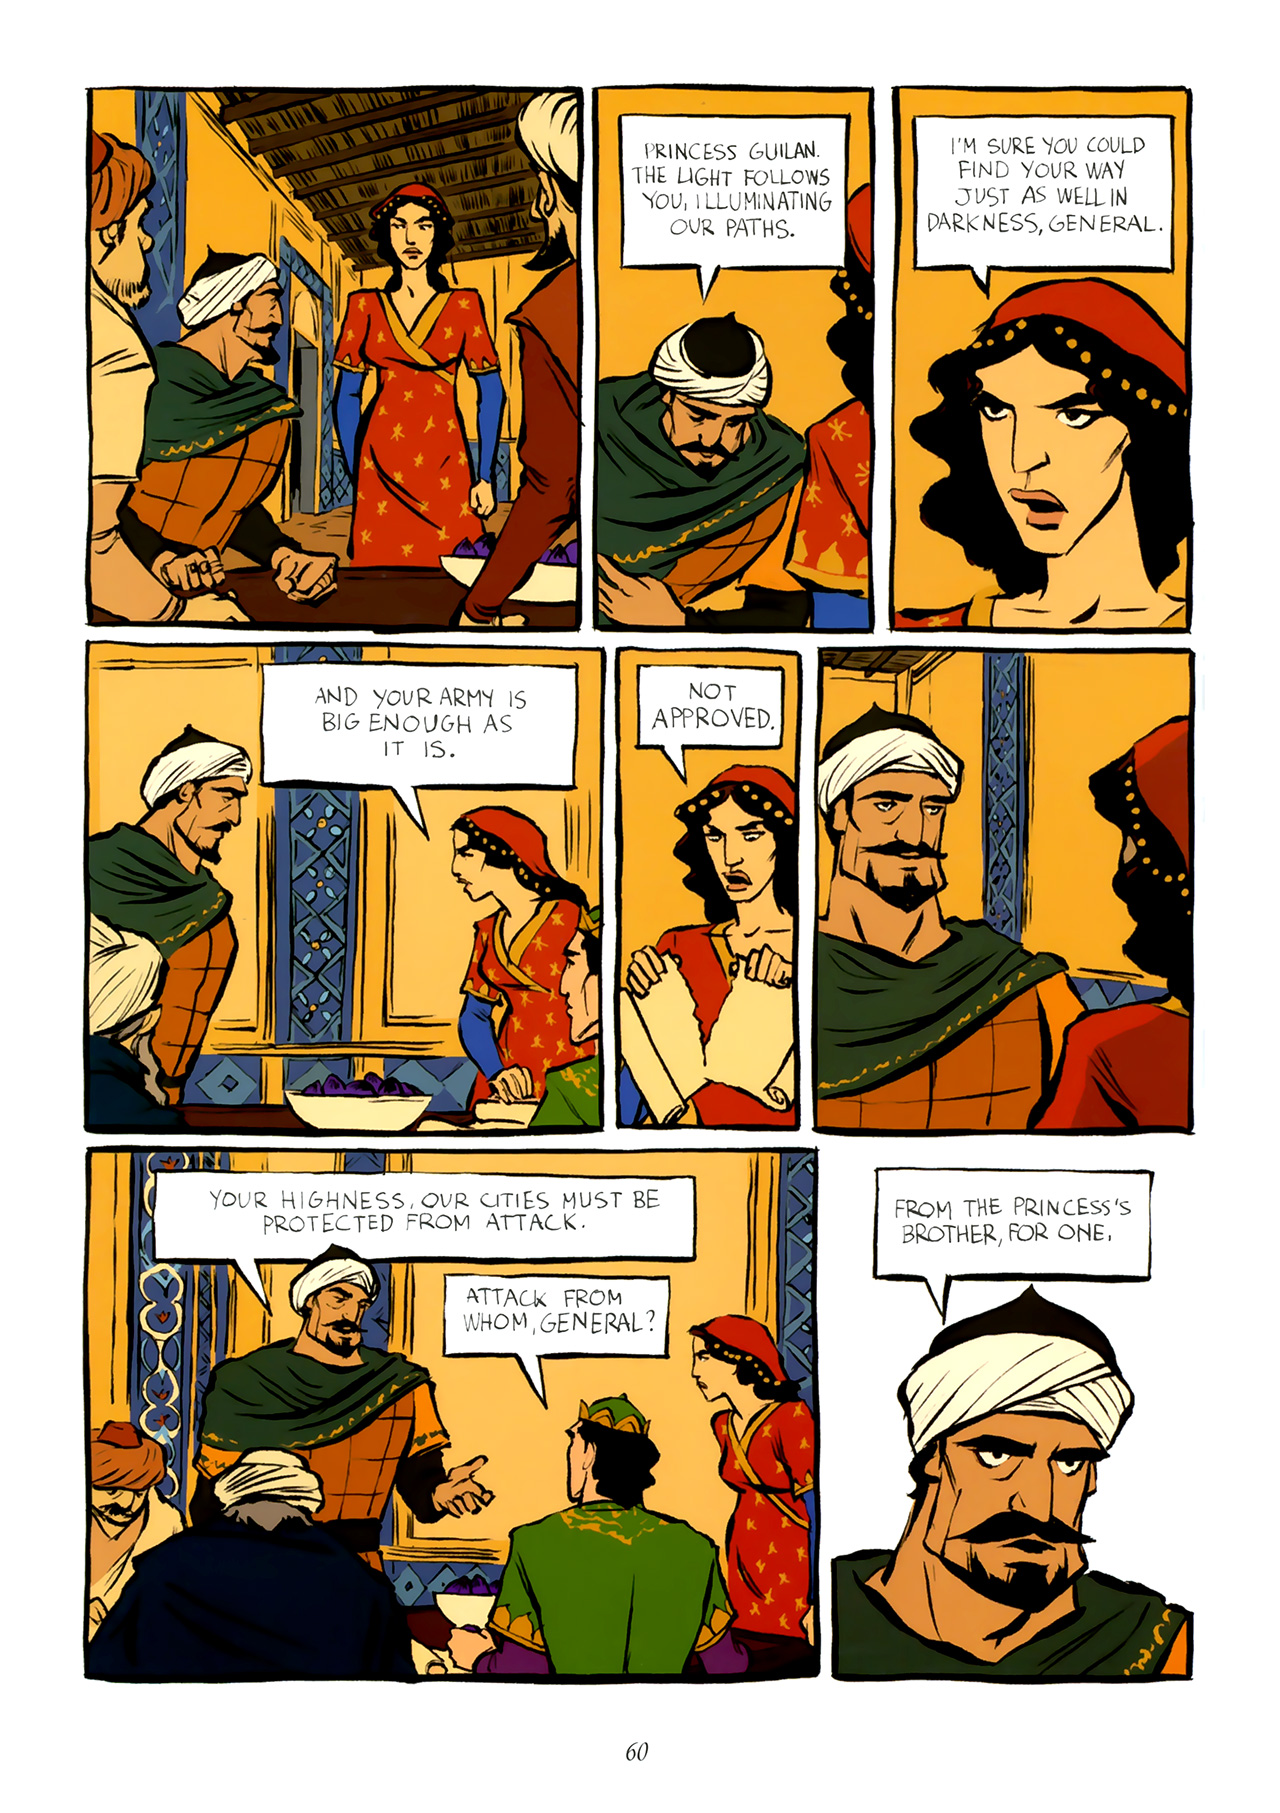 Read online Prince of Persia comic -  Issue # TPB - 62